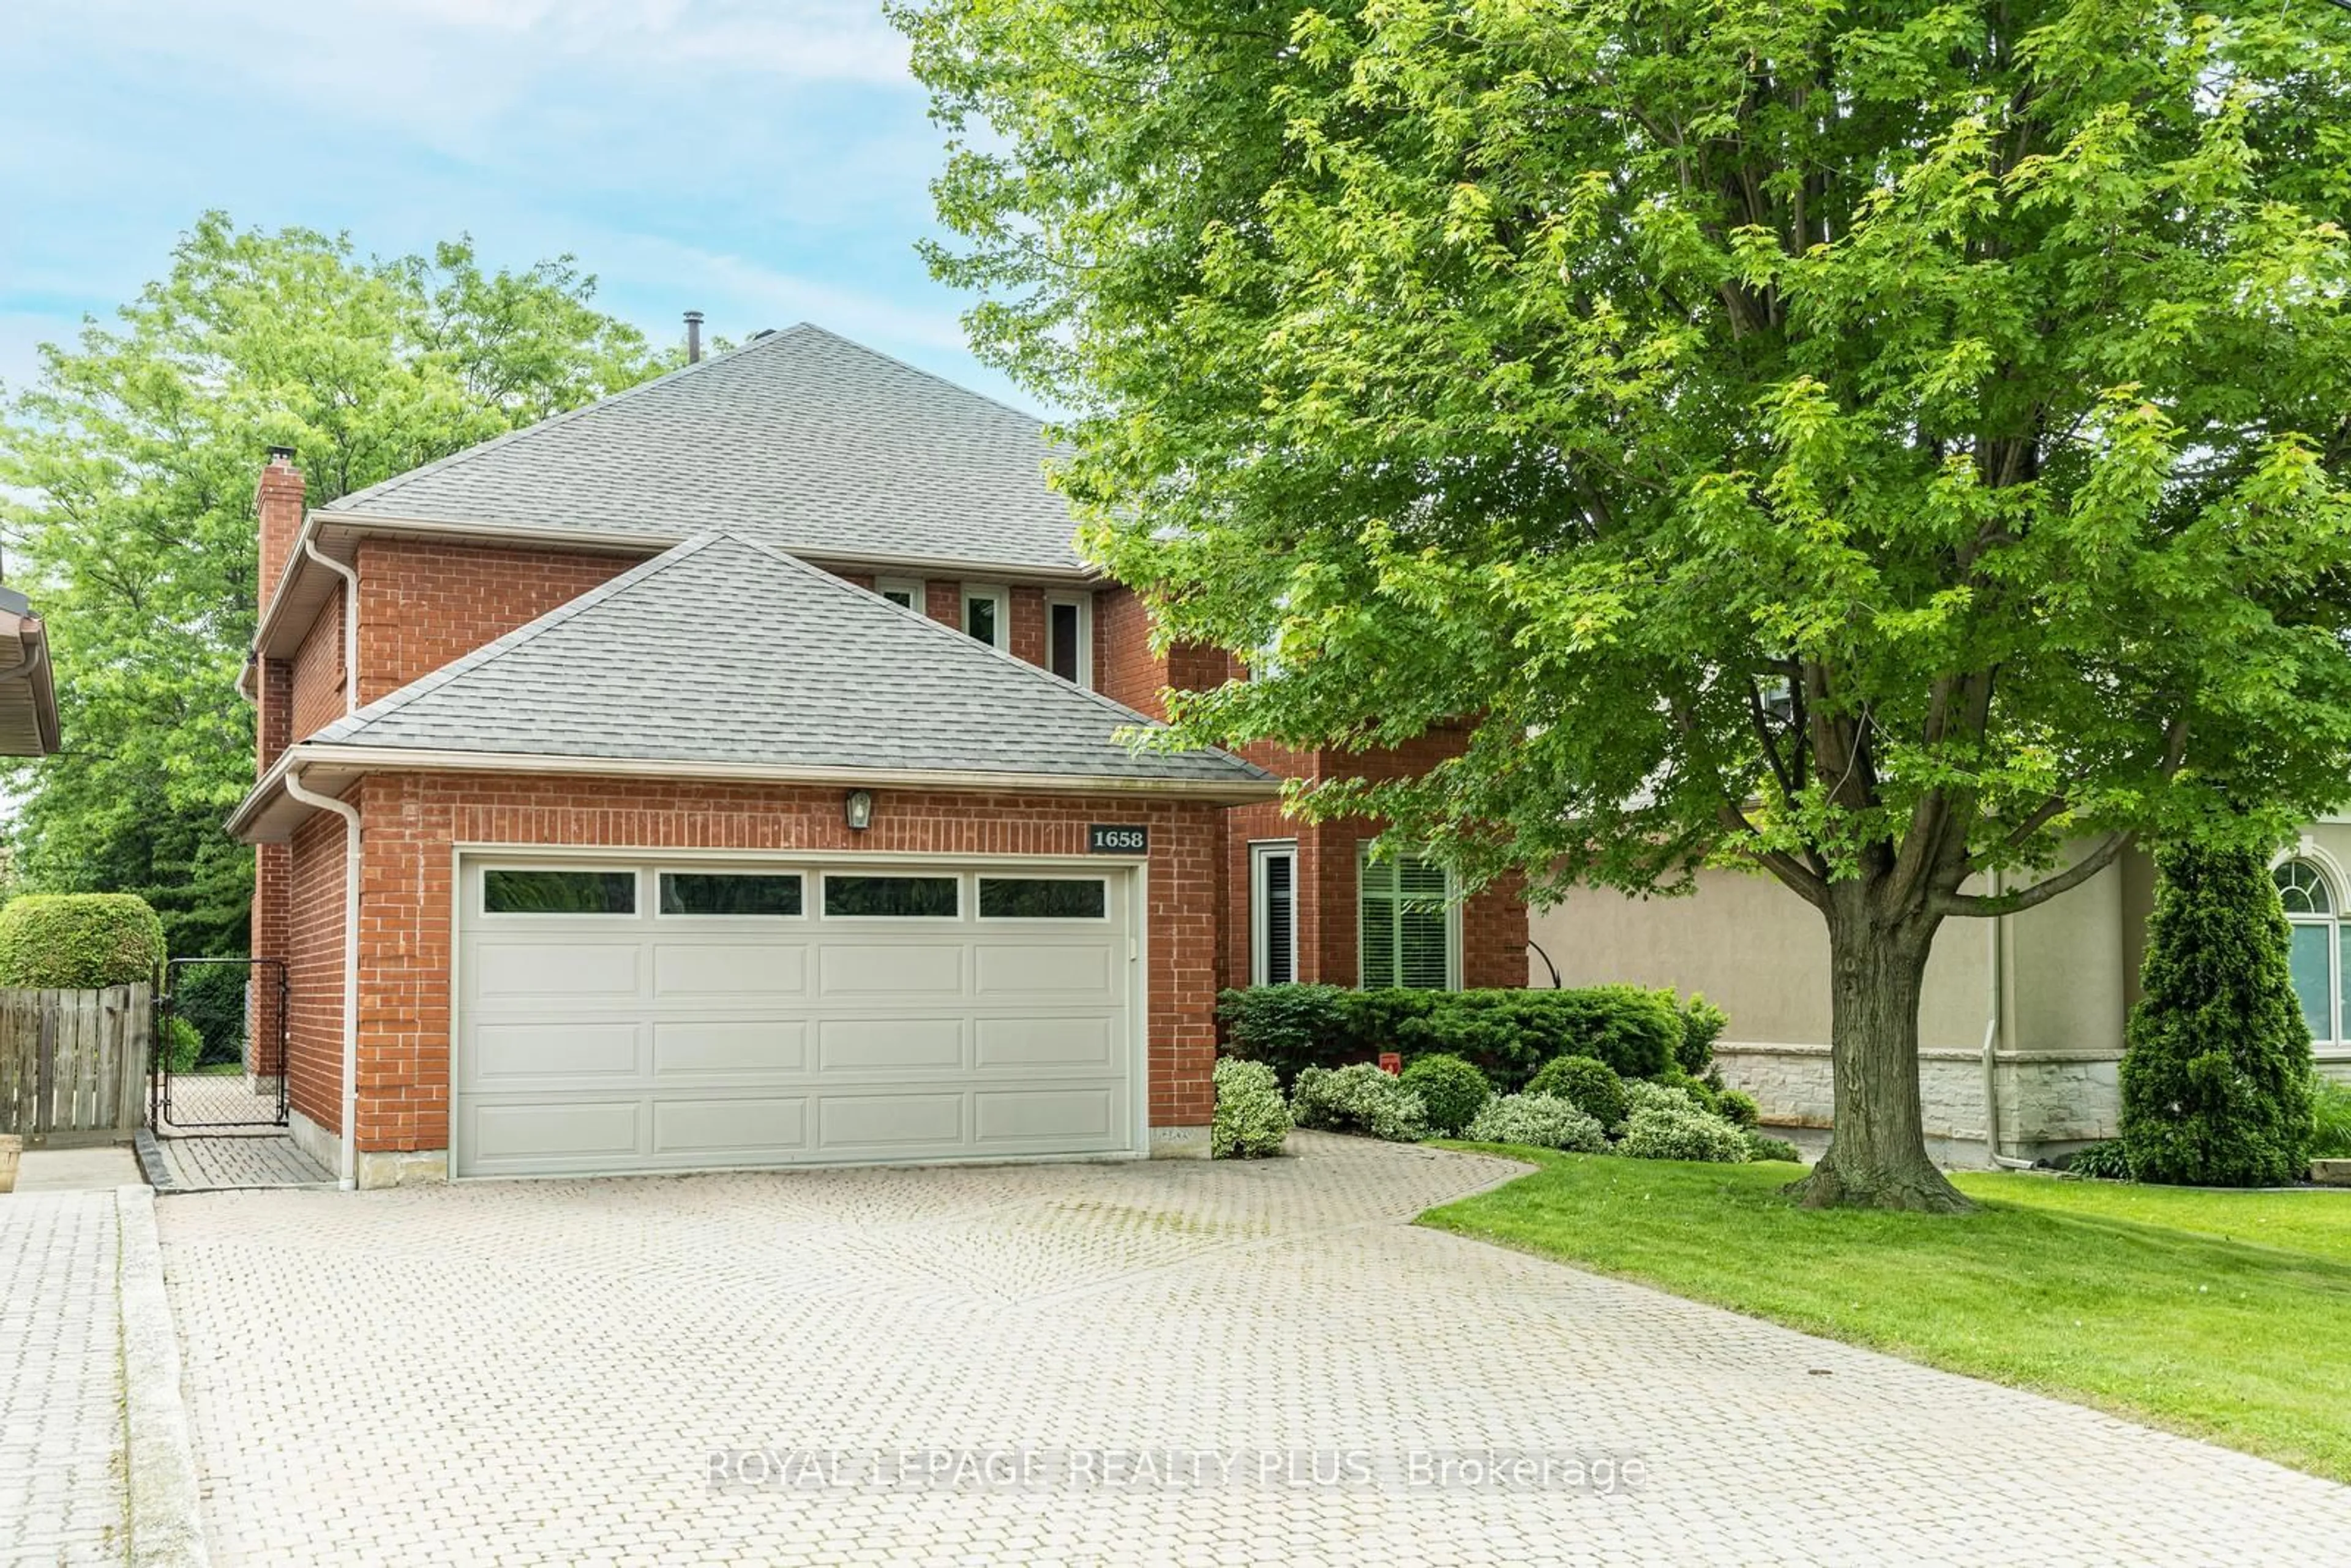 Home with brick exterior material for 1658 Carolyn Rd, Mississauga Ontario L5M 2E1